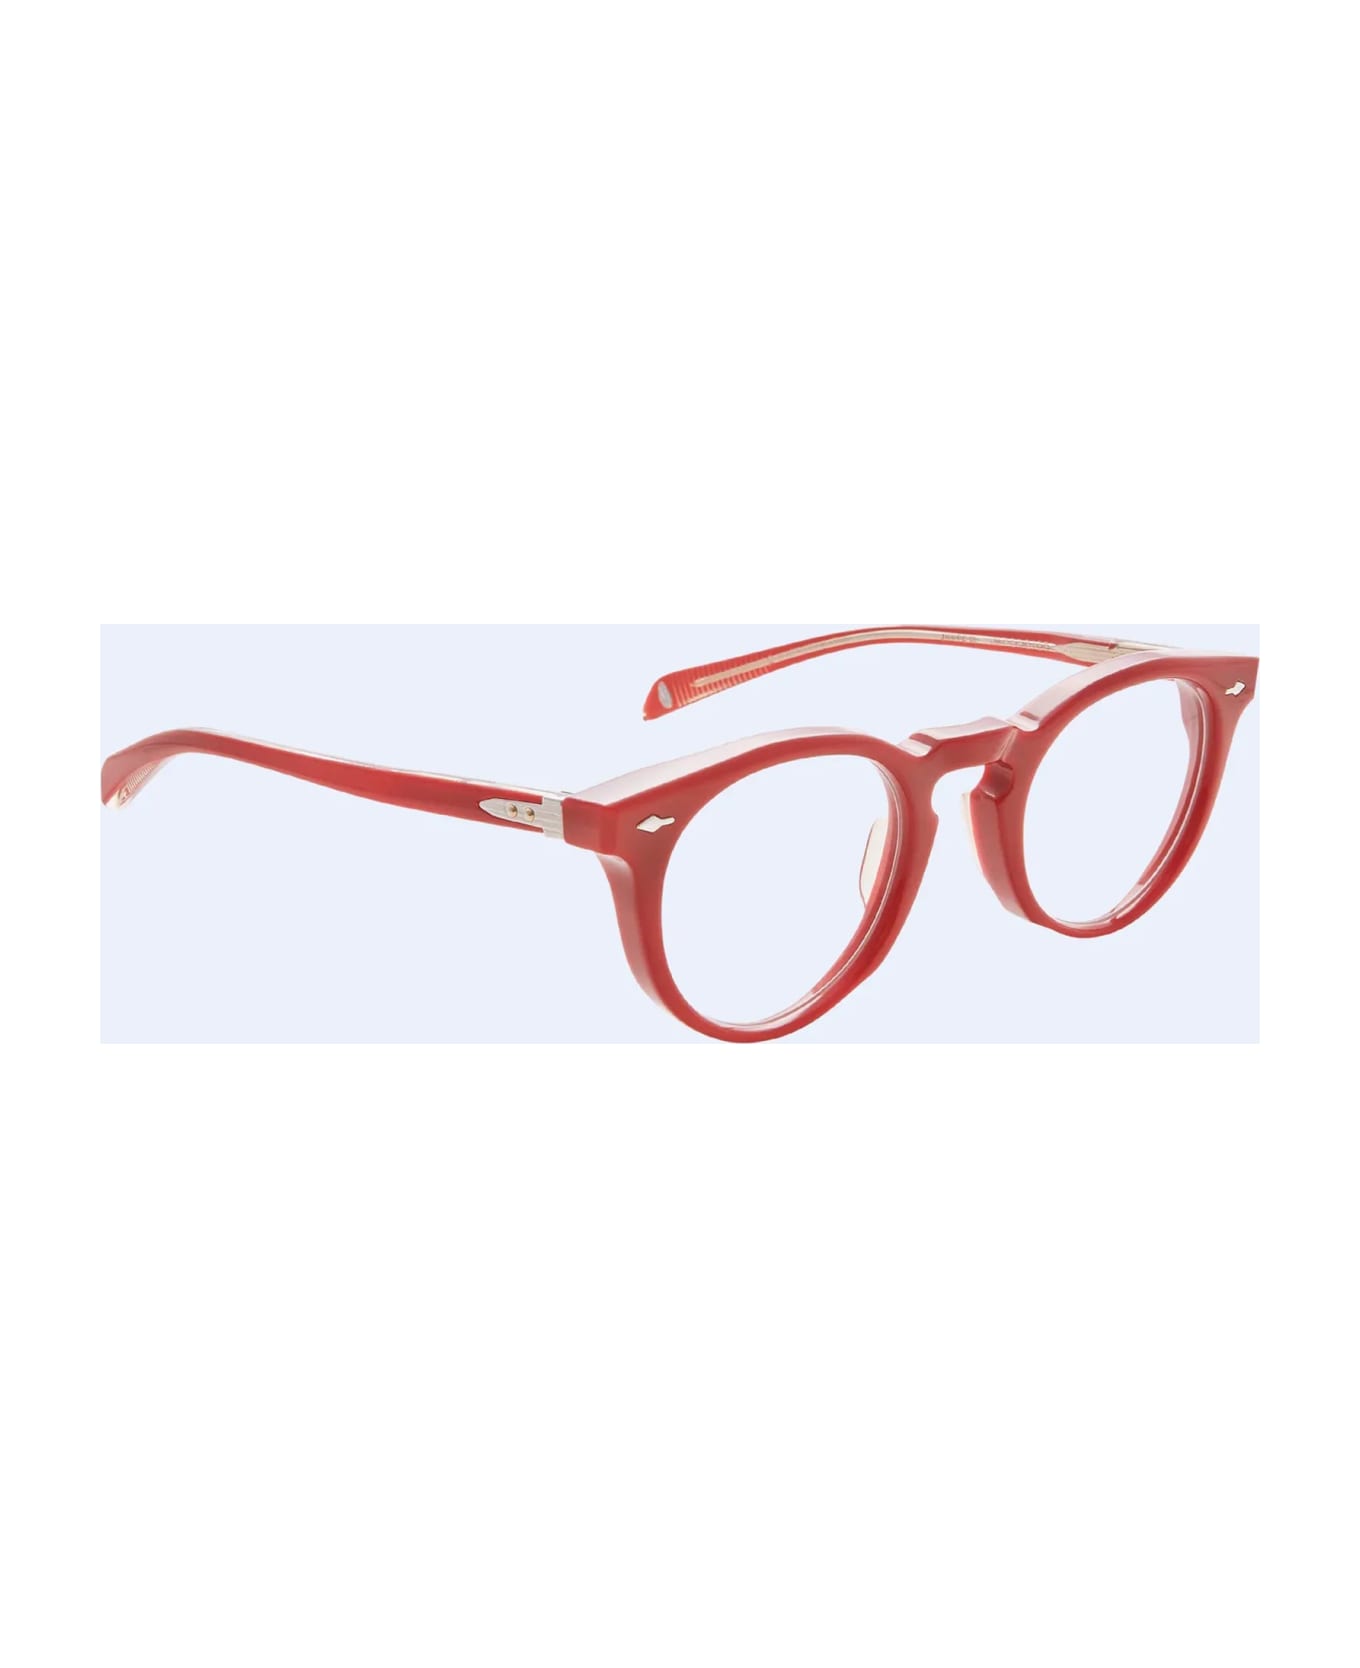 Jacques Marie Mage Percier - Vermillion Glasses - red アイウェア